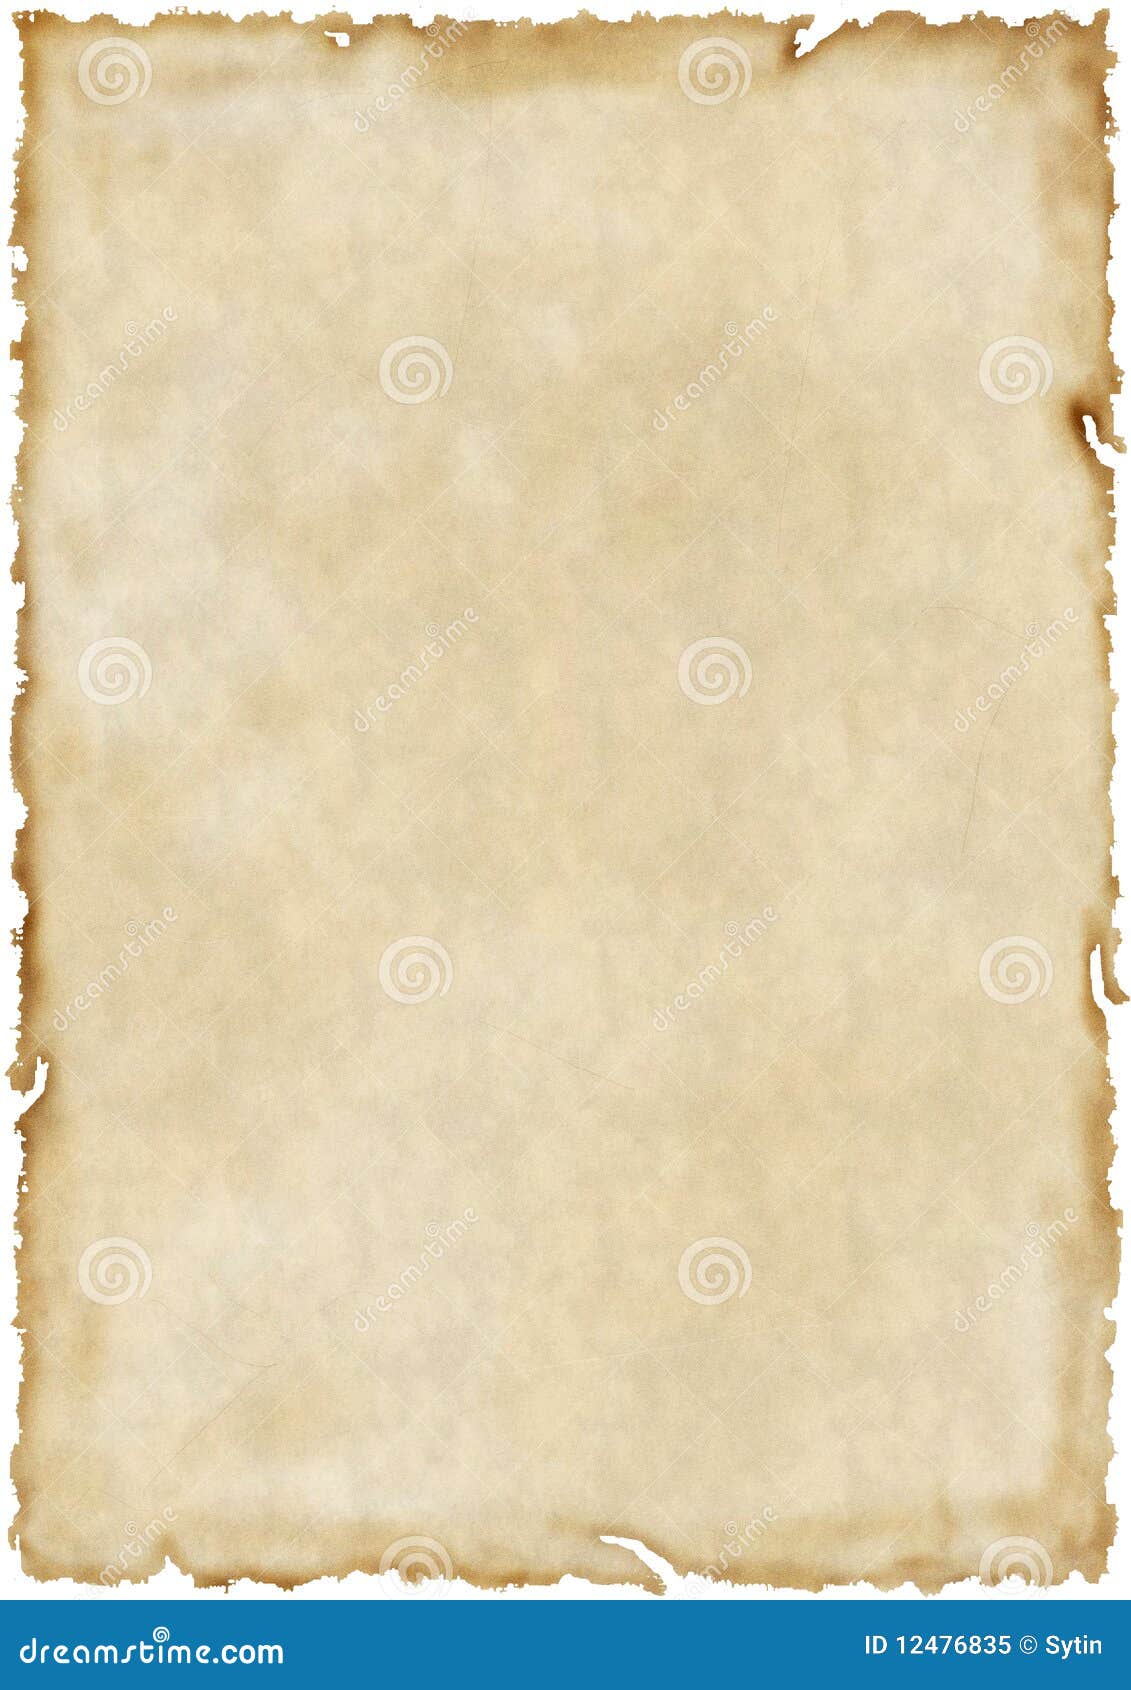 Aged old paper stock photo. Image of background, blank - 13044210